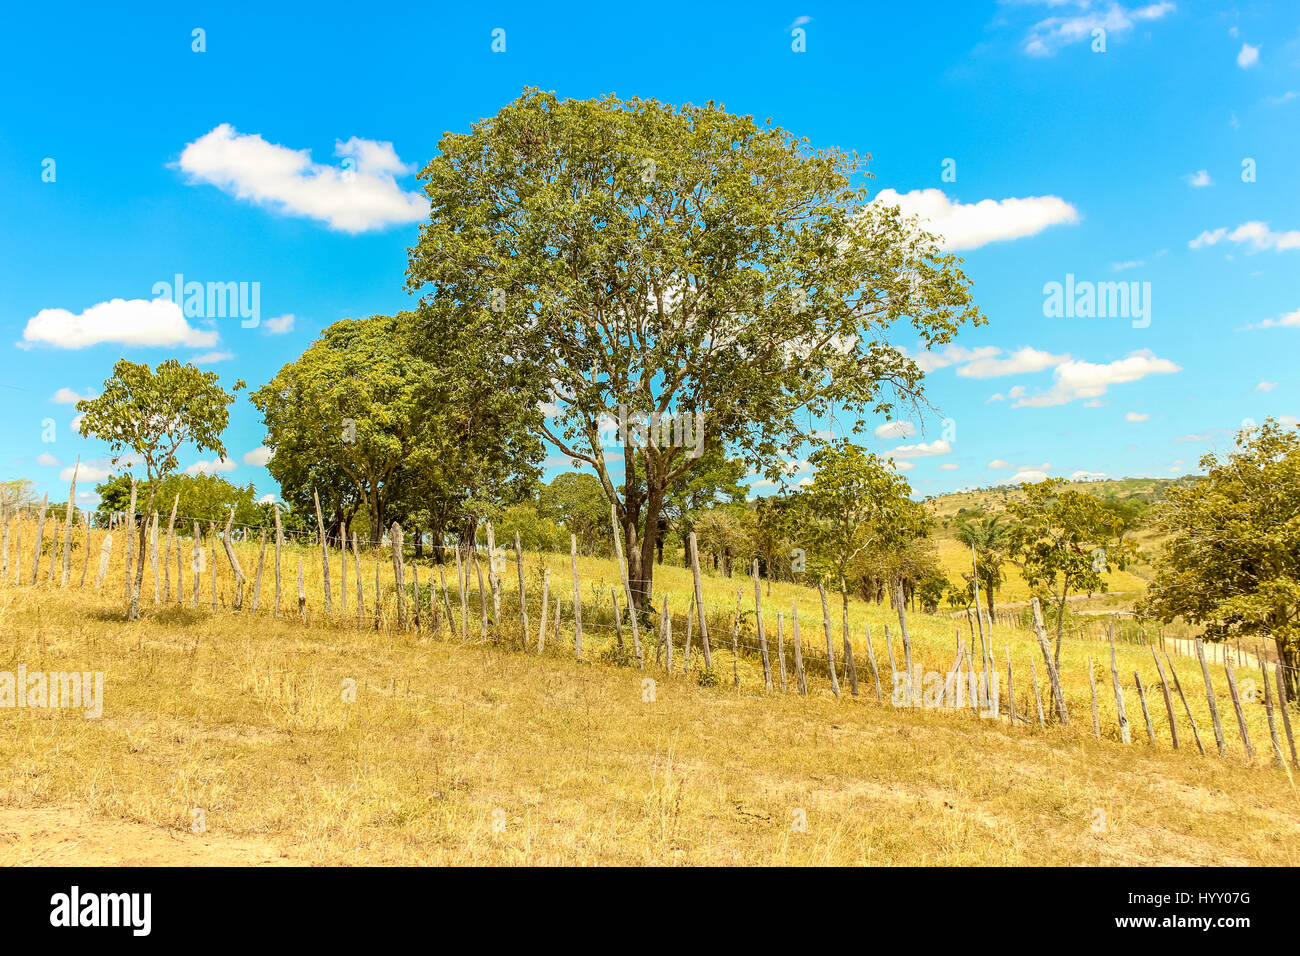 Tree with blue sky, fence and white puffy clouds on a dry land desert outback landscape of Brazil - sertao Stock Photo